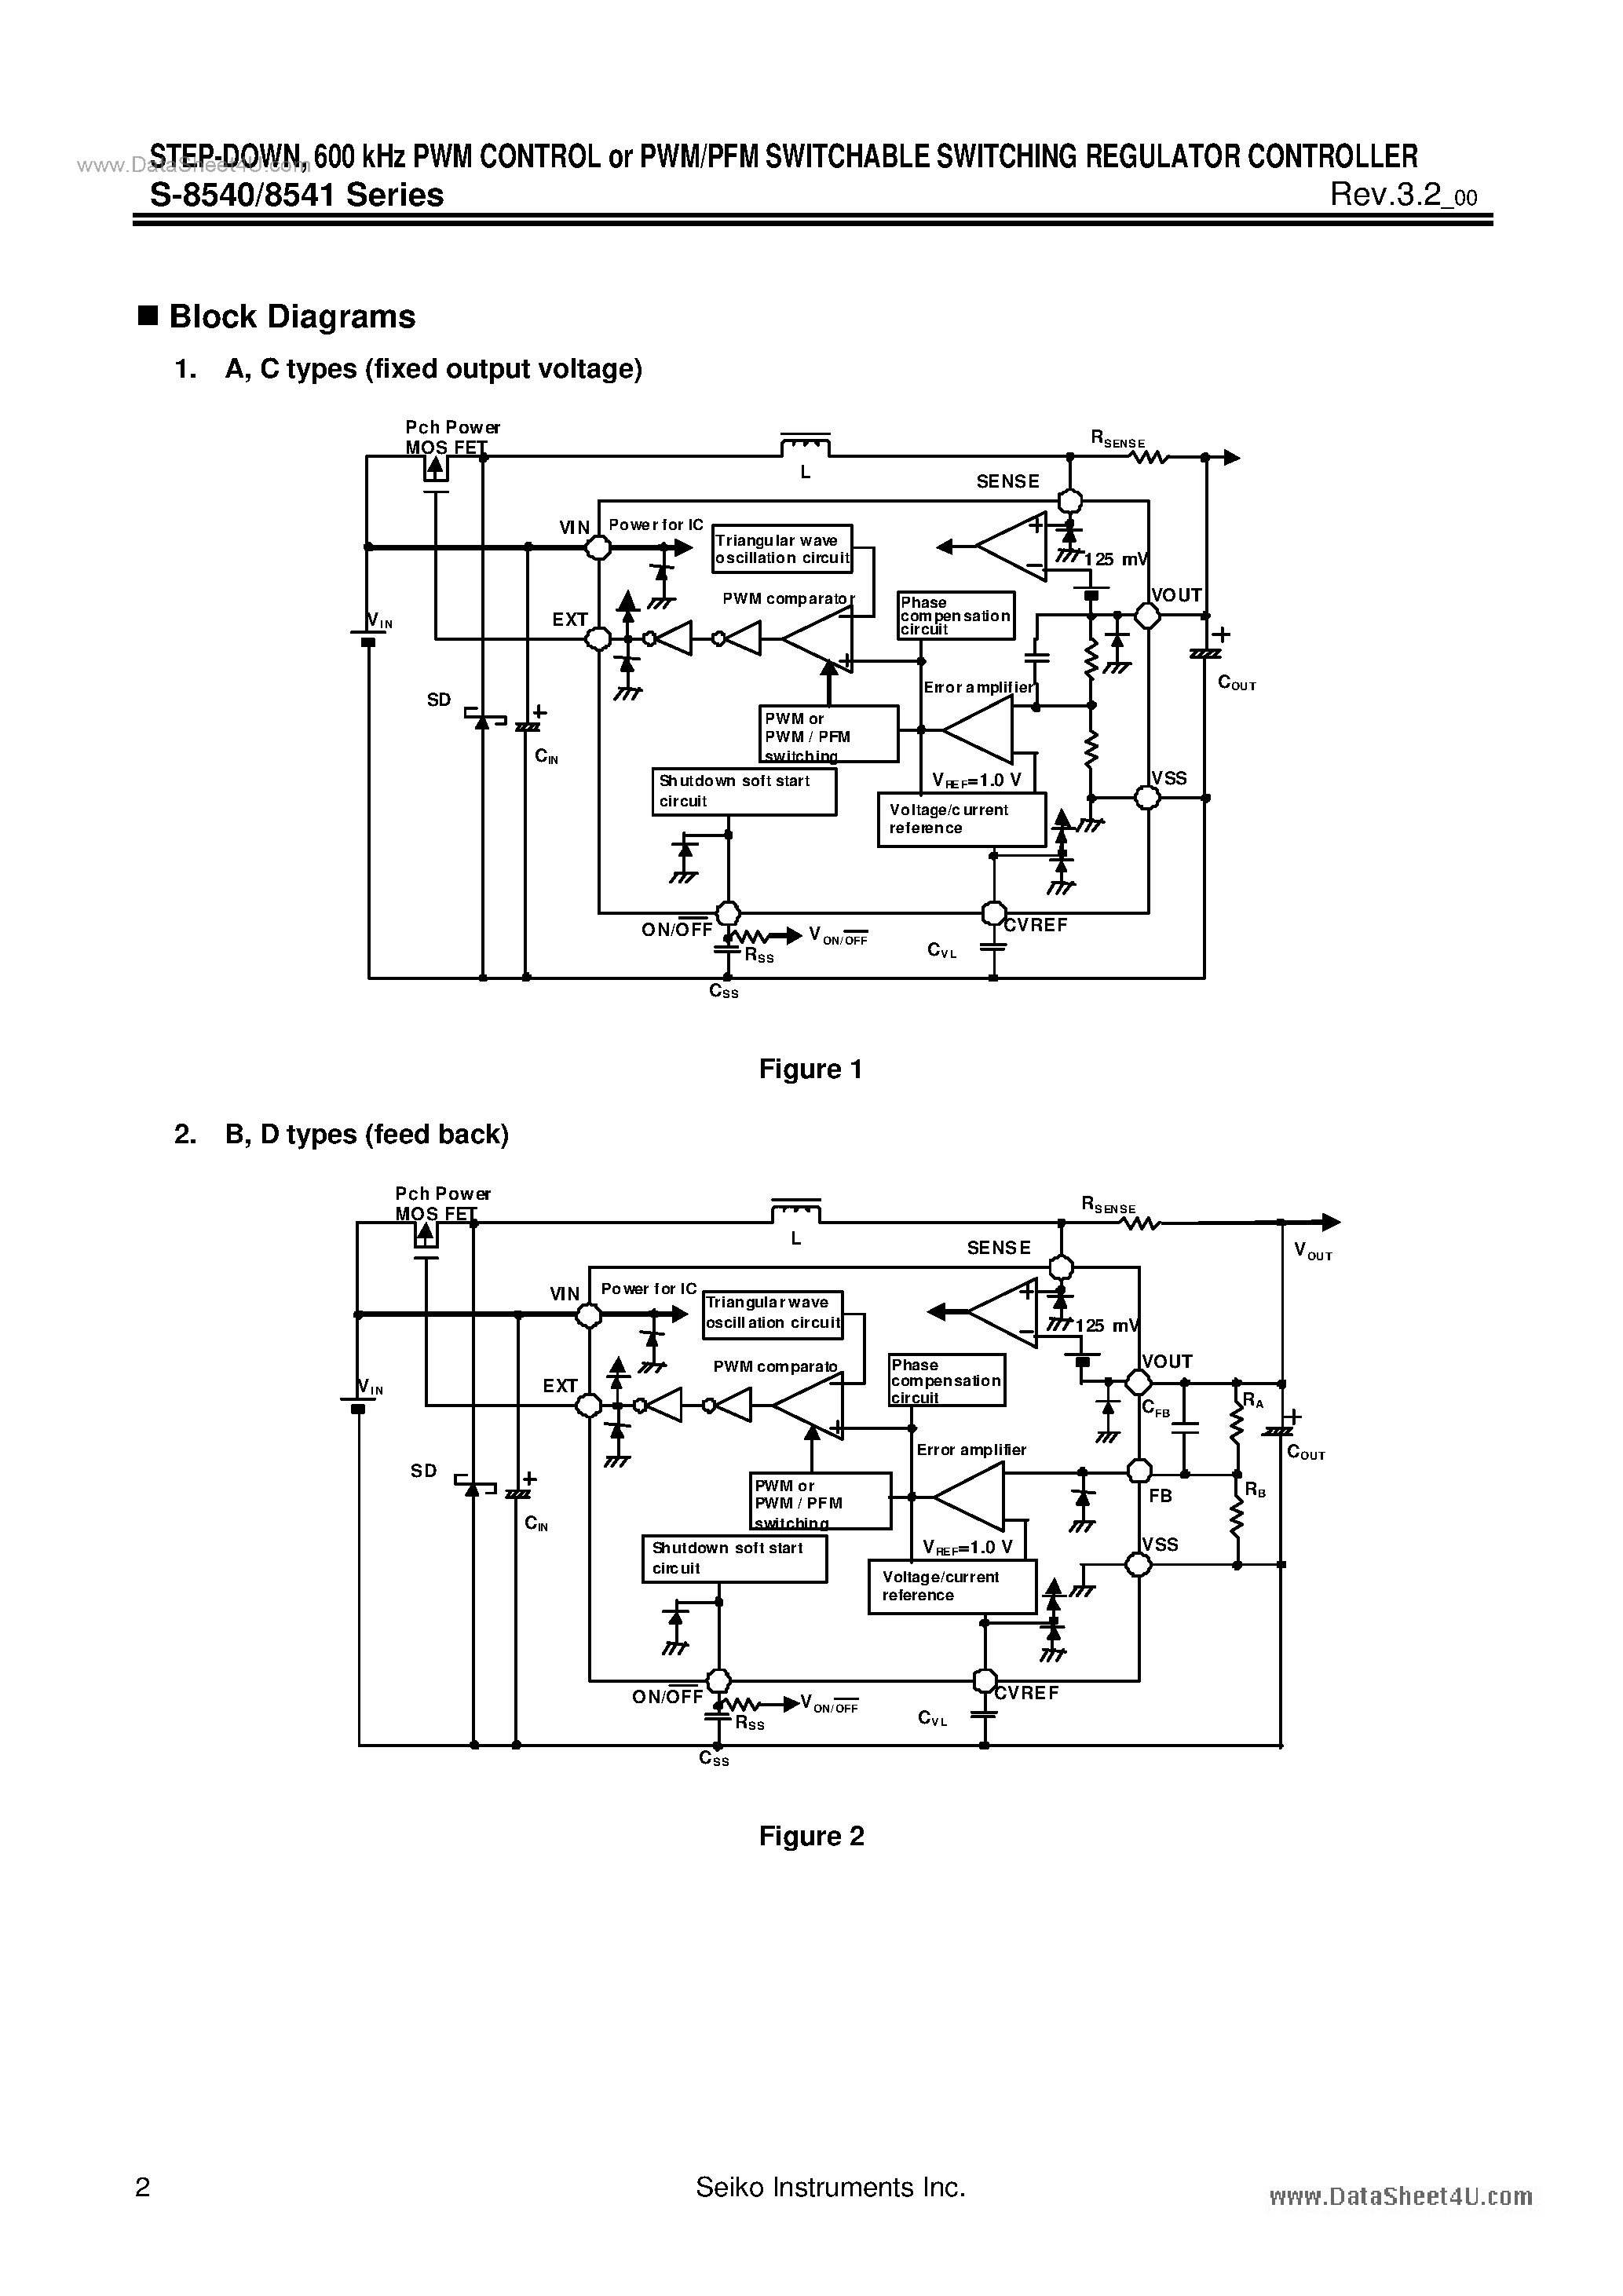 Datasheet S-8540 - (S-8540 / S-8541) 600 kHz PWM CONTROL or PWM/PFM SWITCHABLE SWITCHING REGULATOR CONTROLLER page 2